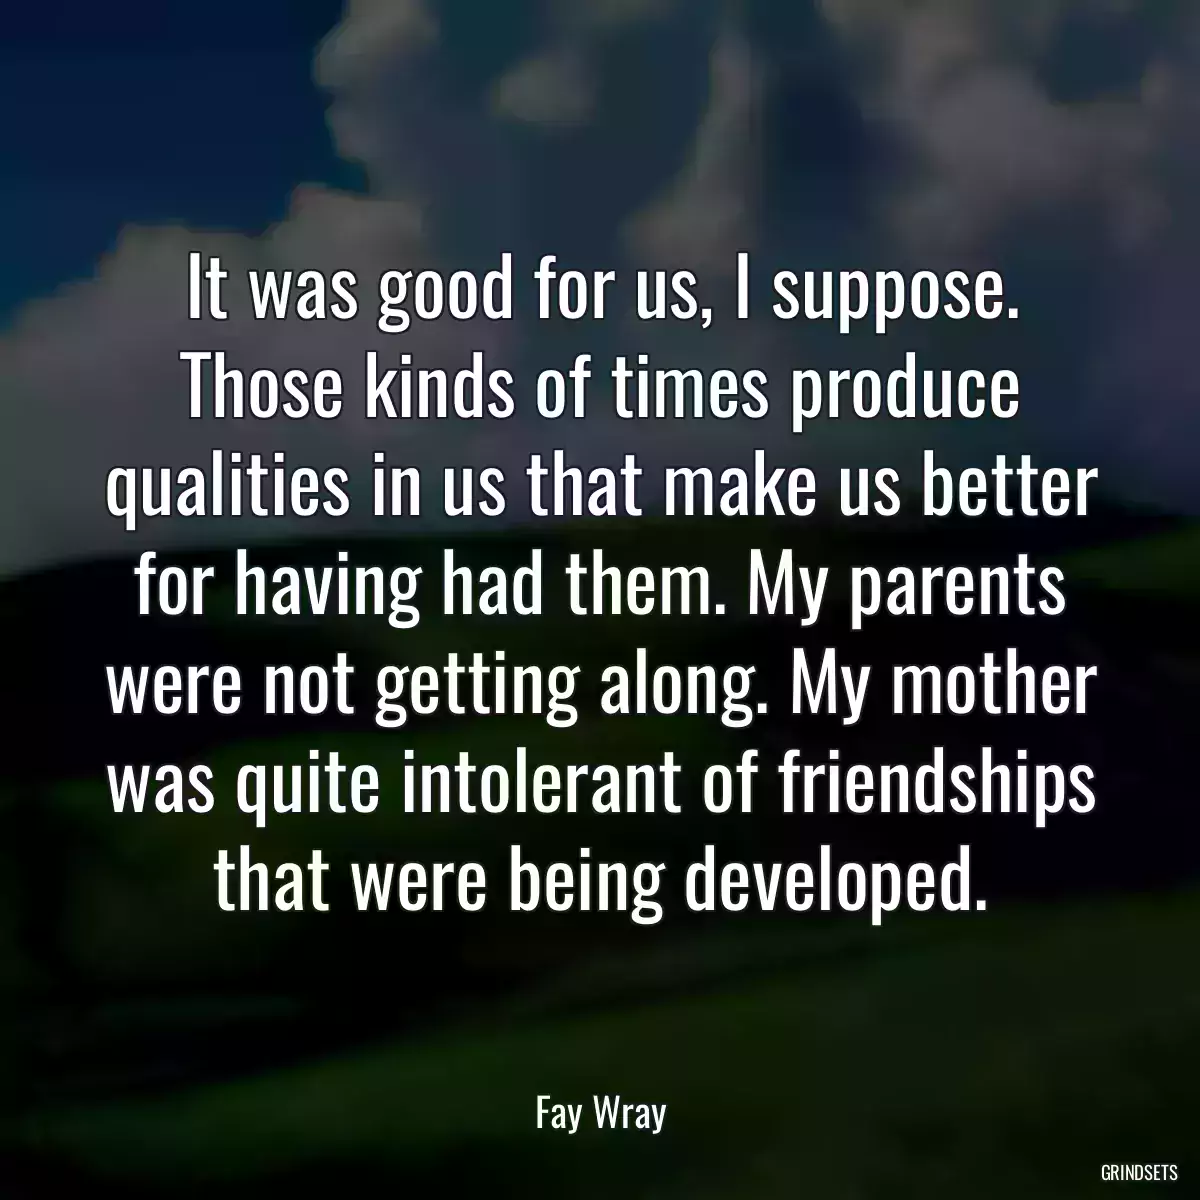 It was good for us, I suppose. Those kinds of times produce qualities in us that make us better for having had them. My parents were not getting along. My mother was quite intolerant of friendships that were being developed.